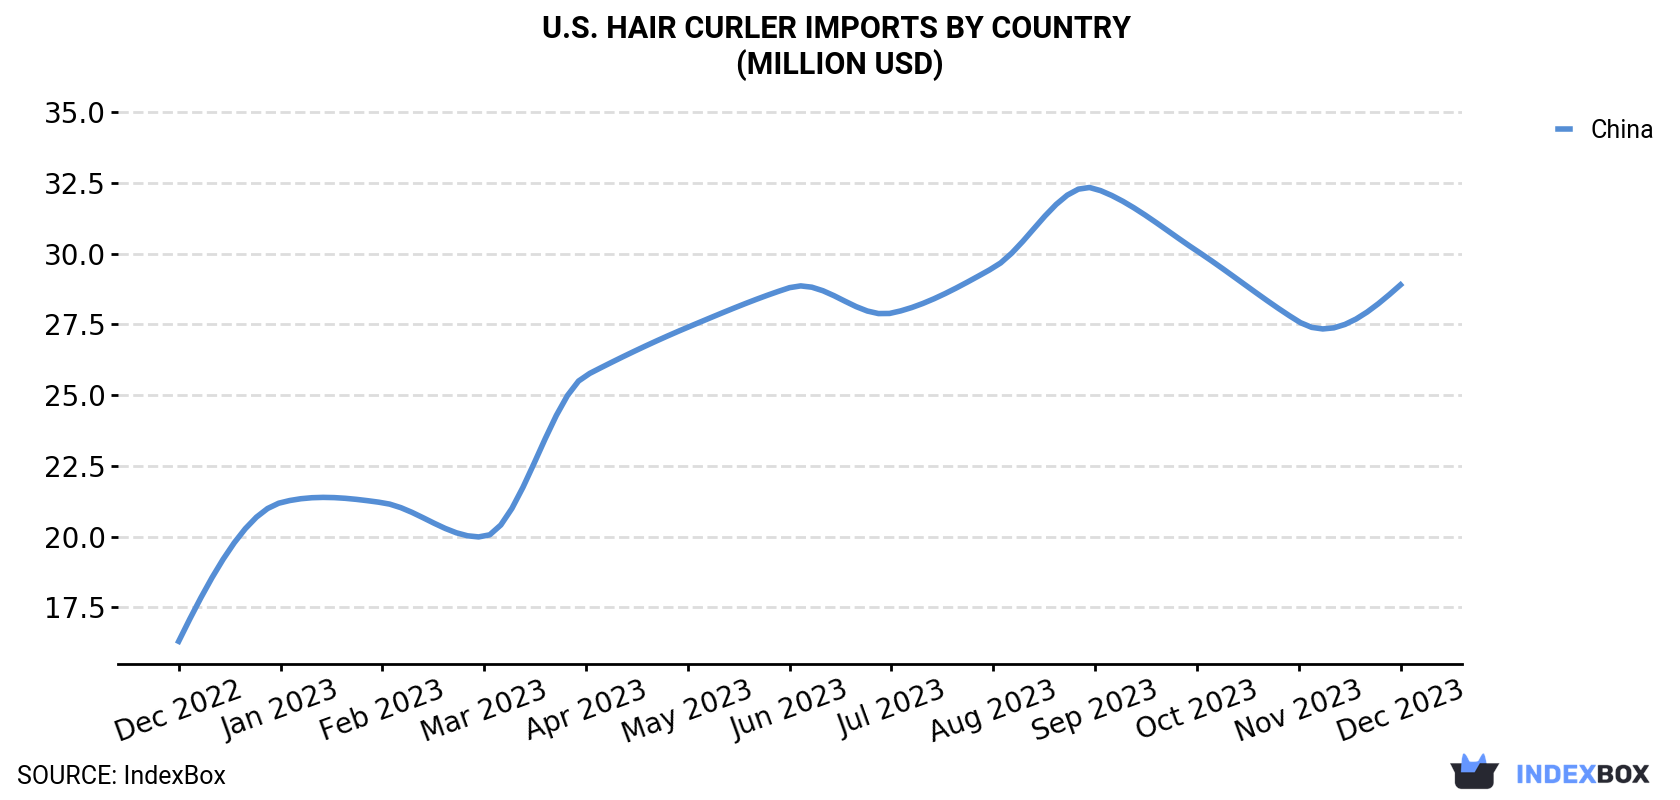 U.S. Hair Curler Imports By Country (Million USD)